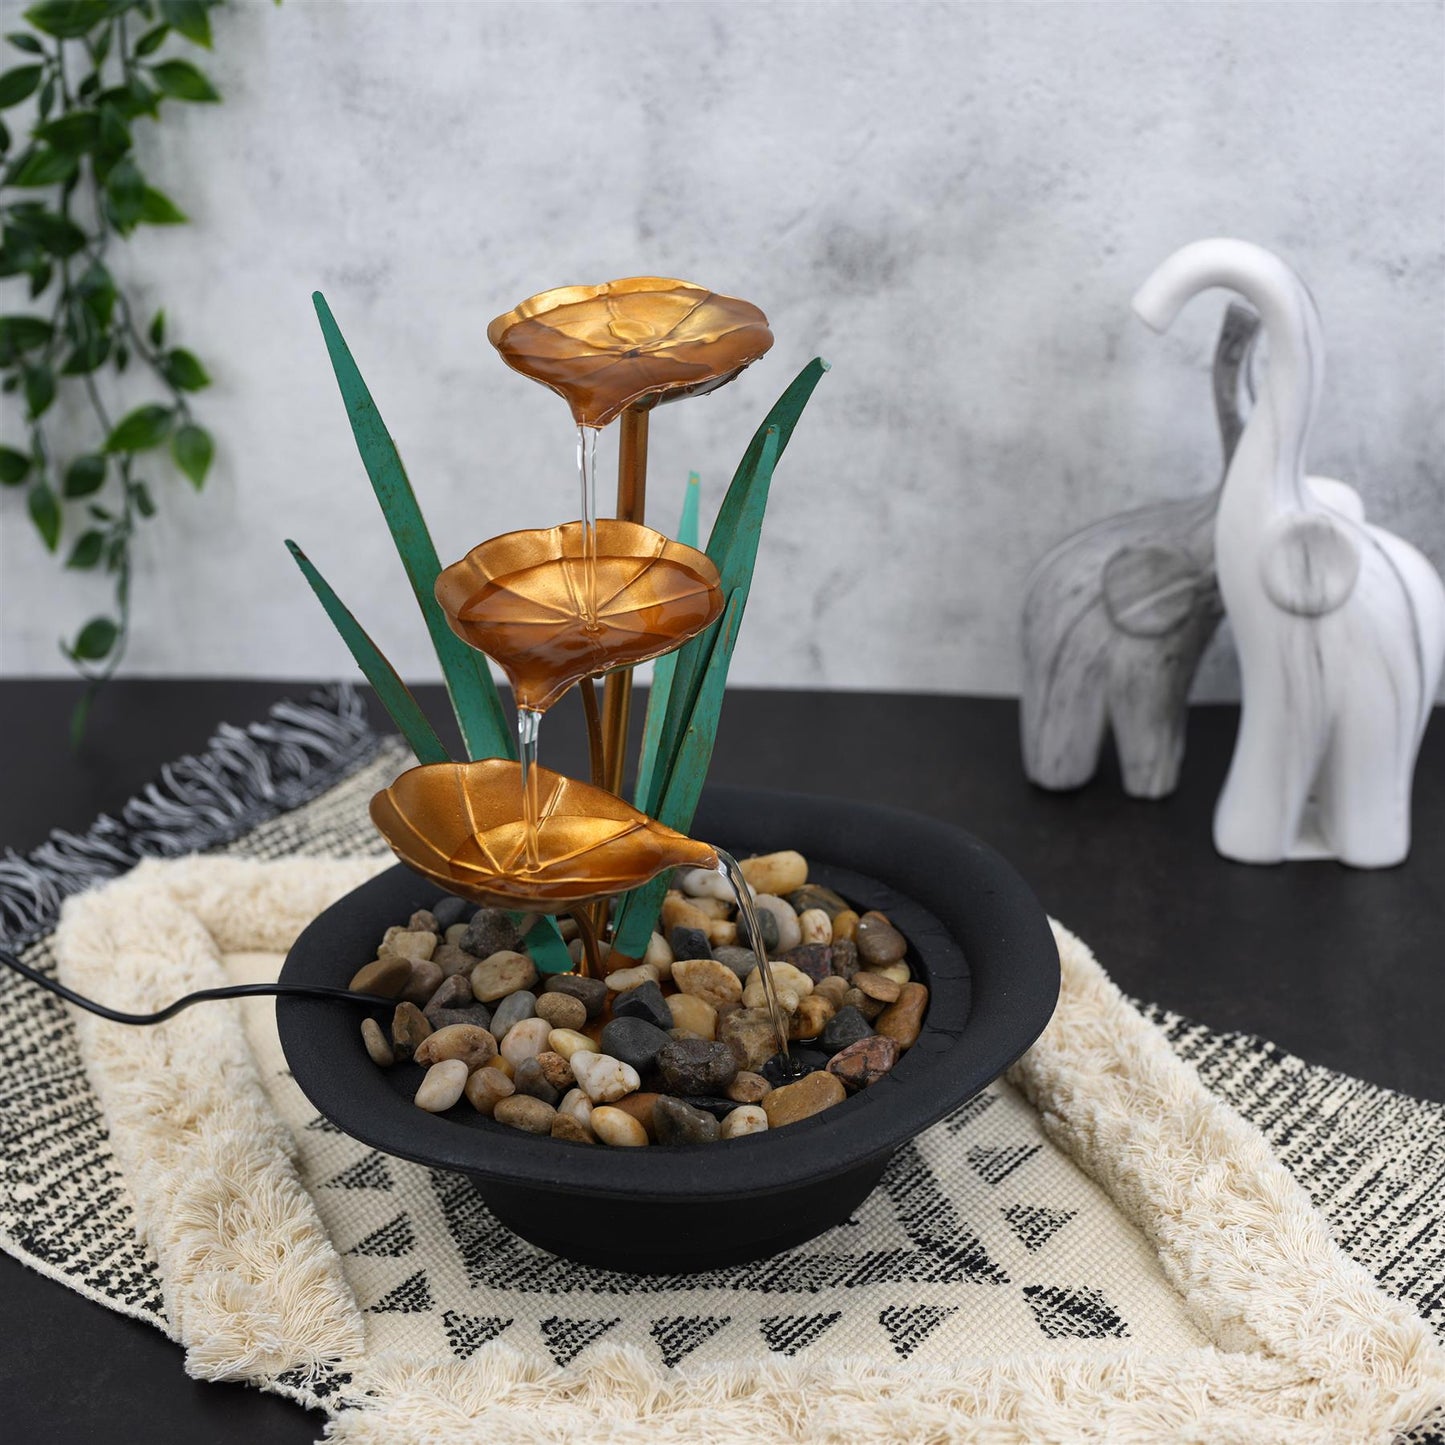 Lotus Water Feature Led Lights by GEEZY - UKBuyZone